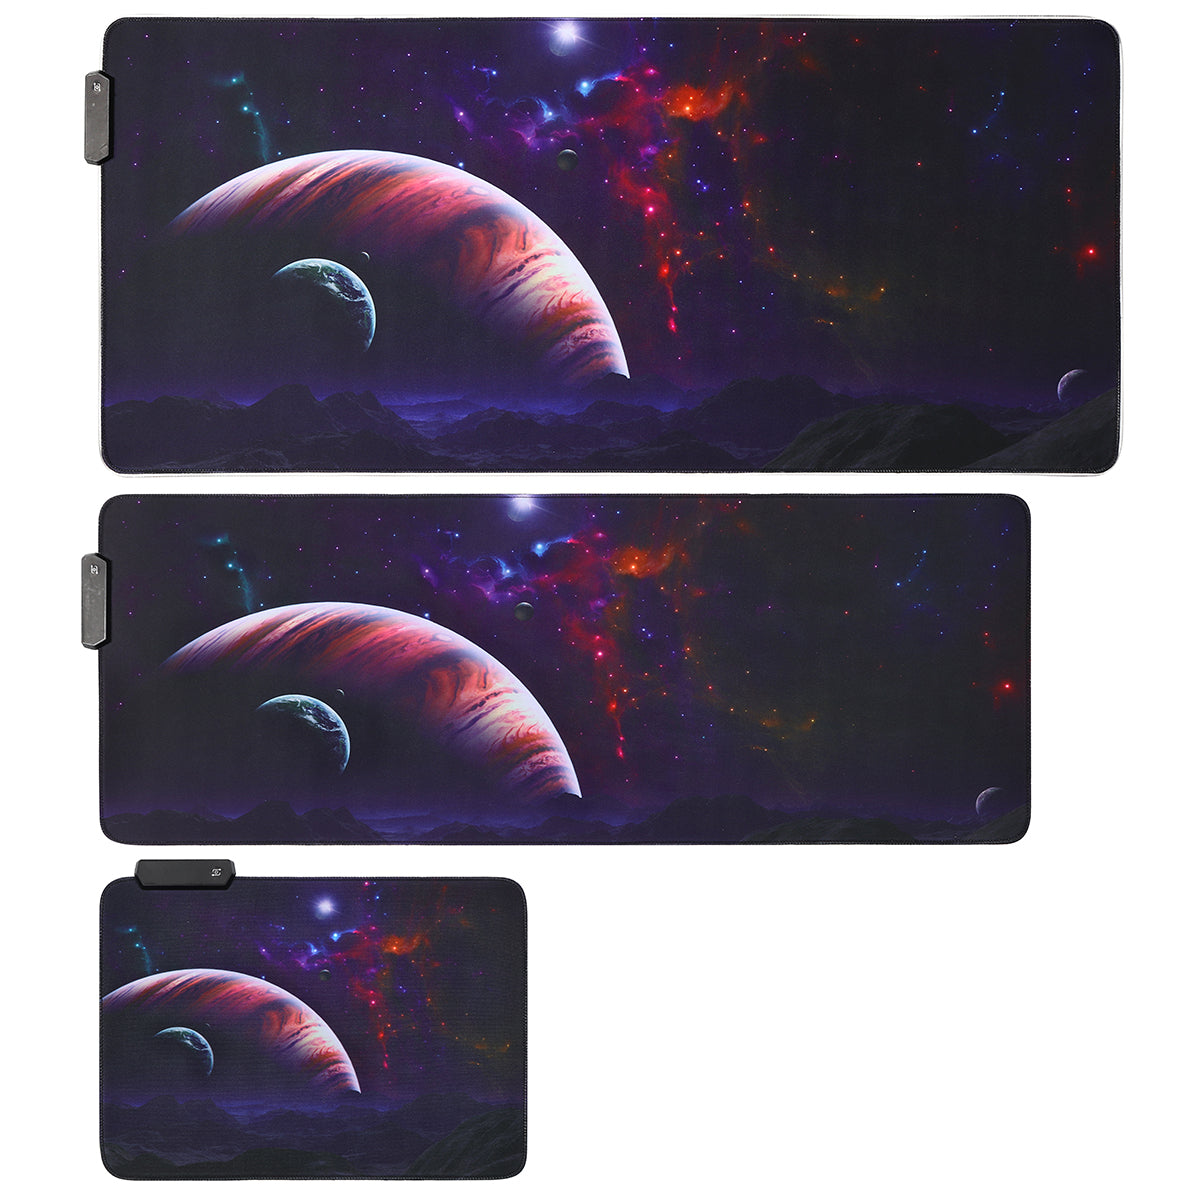 The Vast Sky USB Wired RGB Colorful Backlit LED Mouse Pad for Gaming Mouse